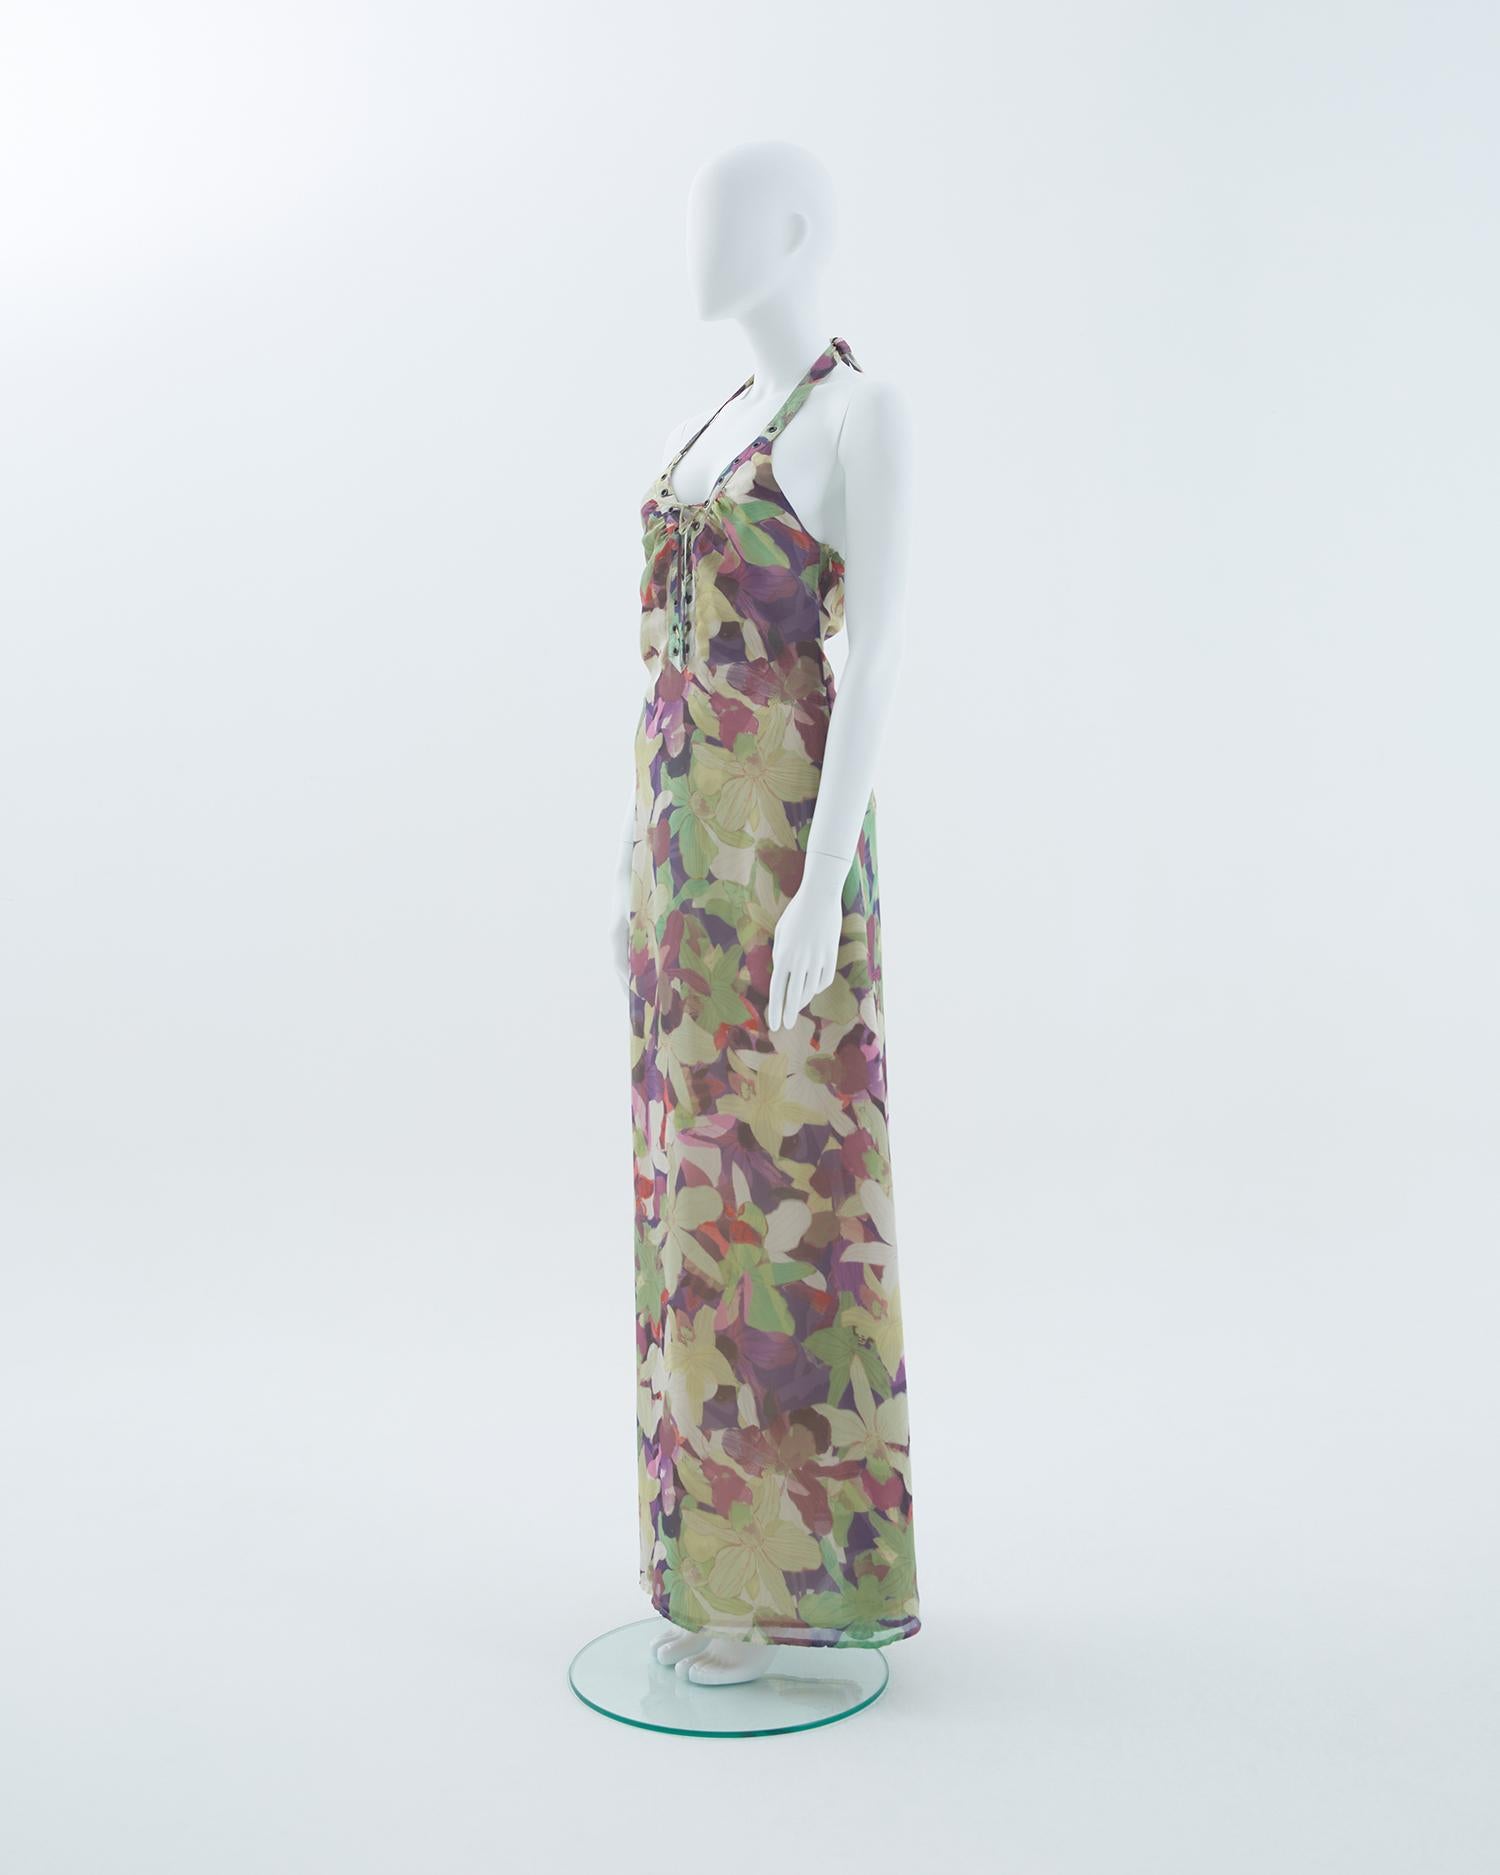 - Designed by Valentino Garavani
- Sold by Skof.Archive
- Green, yellow, purple and red print silk flower motif 
- Halter evening dress
- Open back 
- Fitted to the body
- Open in front with lace-up fastenings 
- Hidden side zipper closure with hook